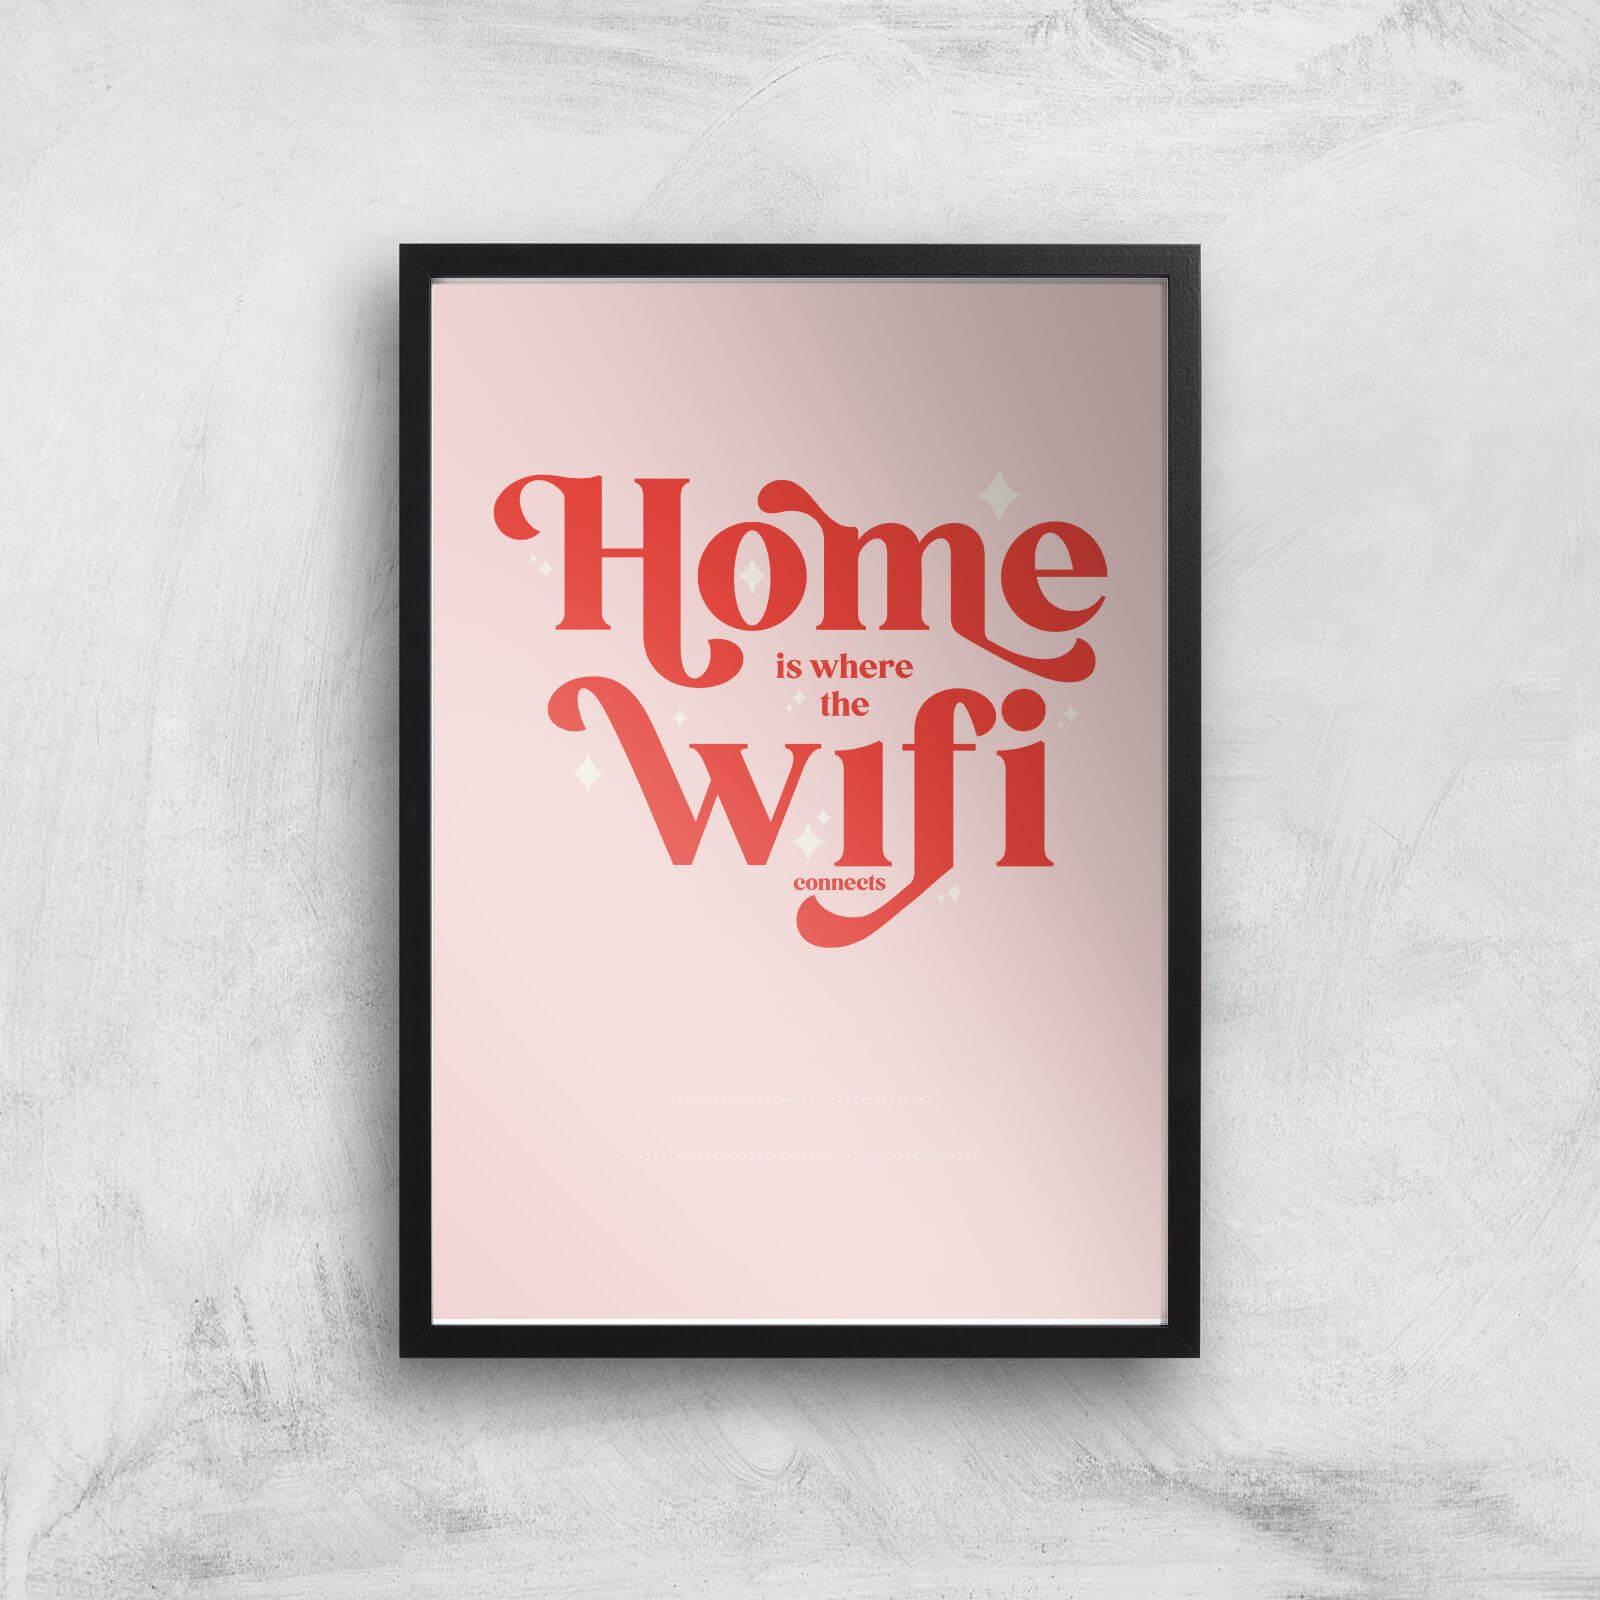 Hermione Chantal Light Home Is Where The Wifi Is Giclee Art Print - A3 - Black Frame